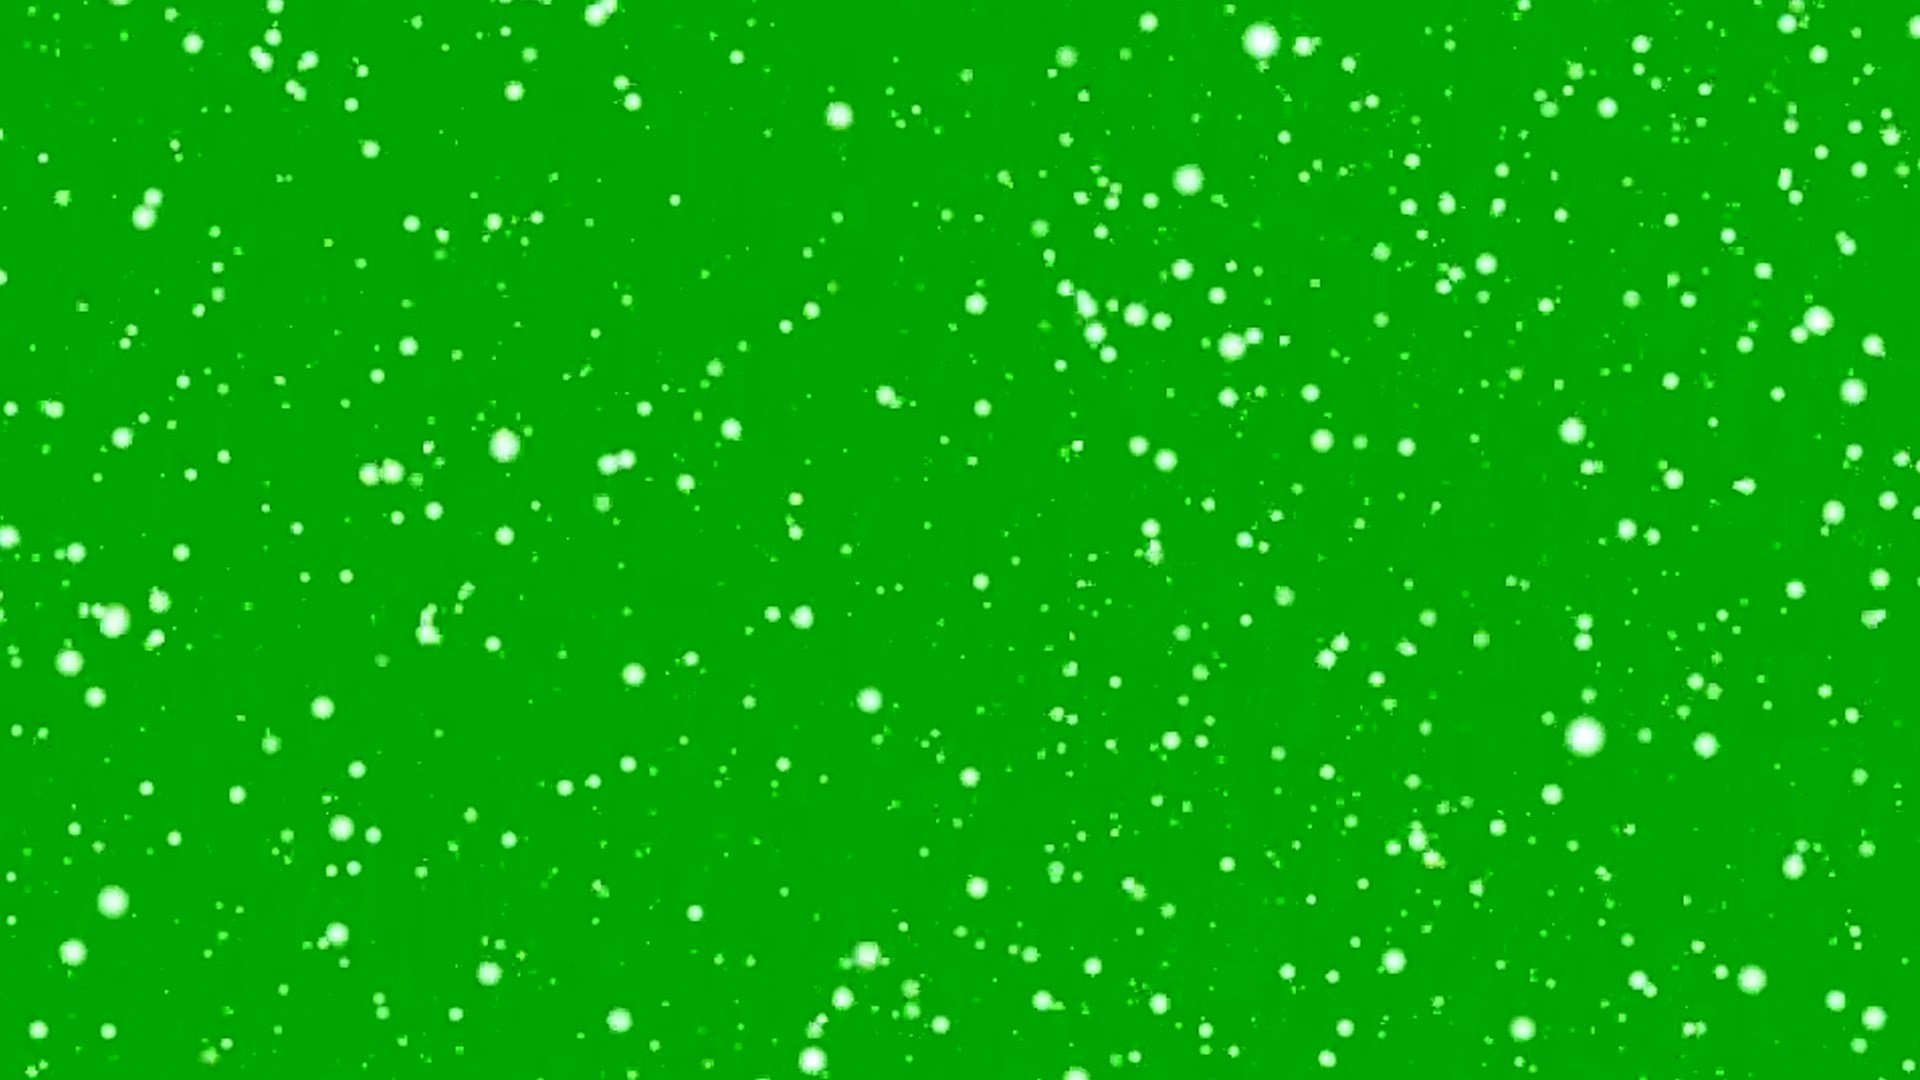 1920x1080 Snowflakes Falling on Green Screen Motion Background